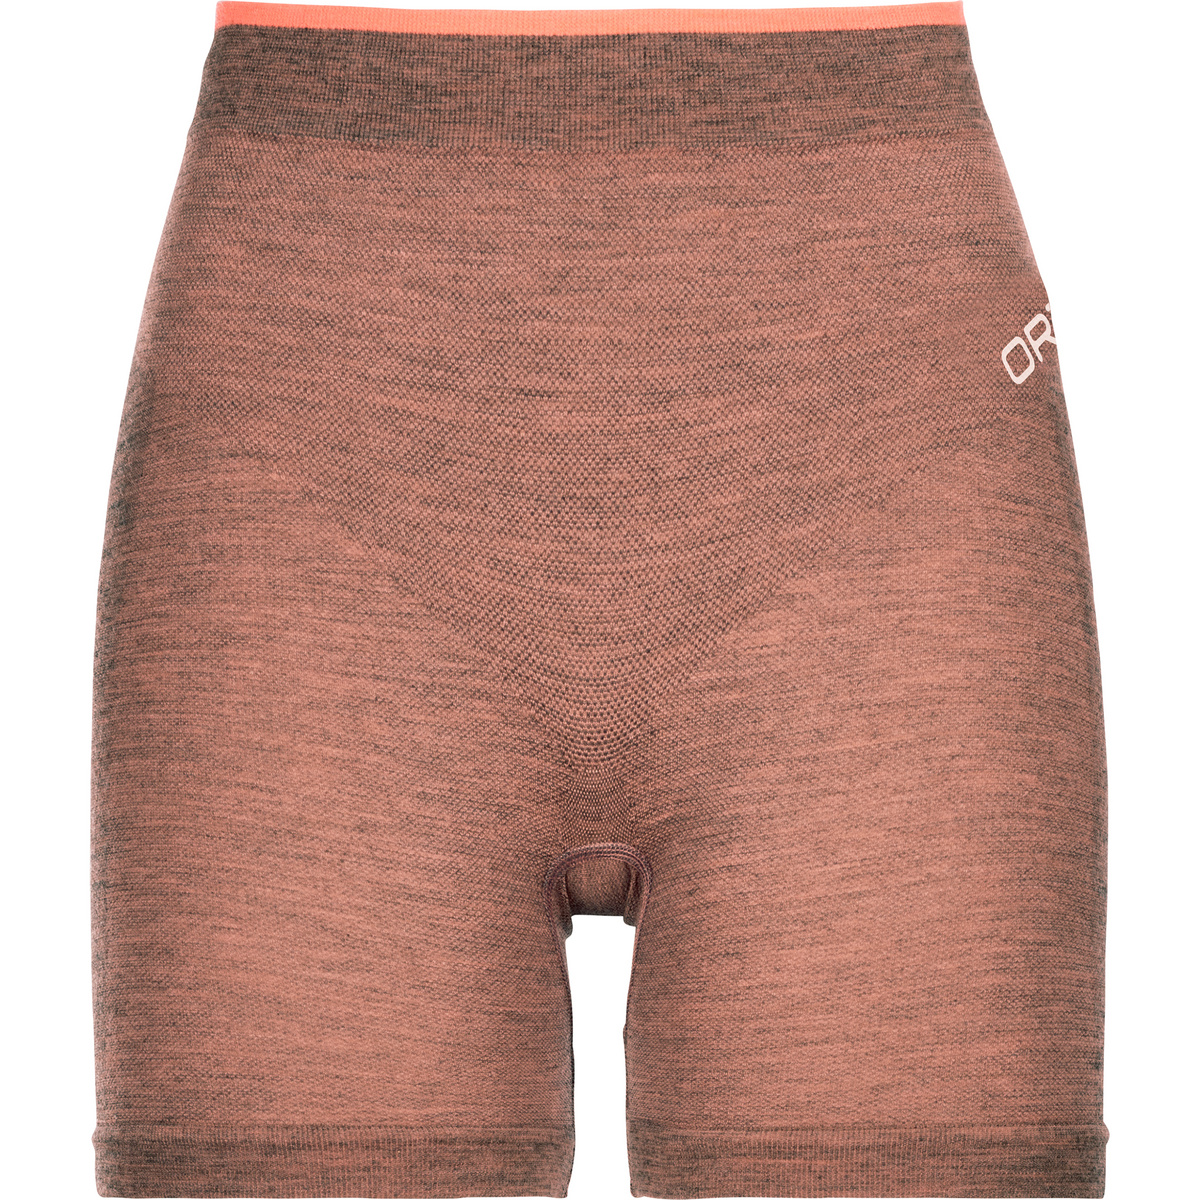 Image of Ortovox Donna Boxer 230 Competition